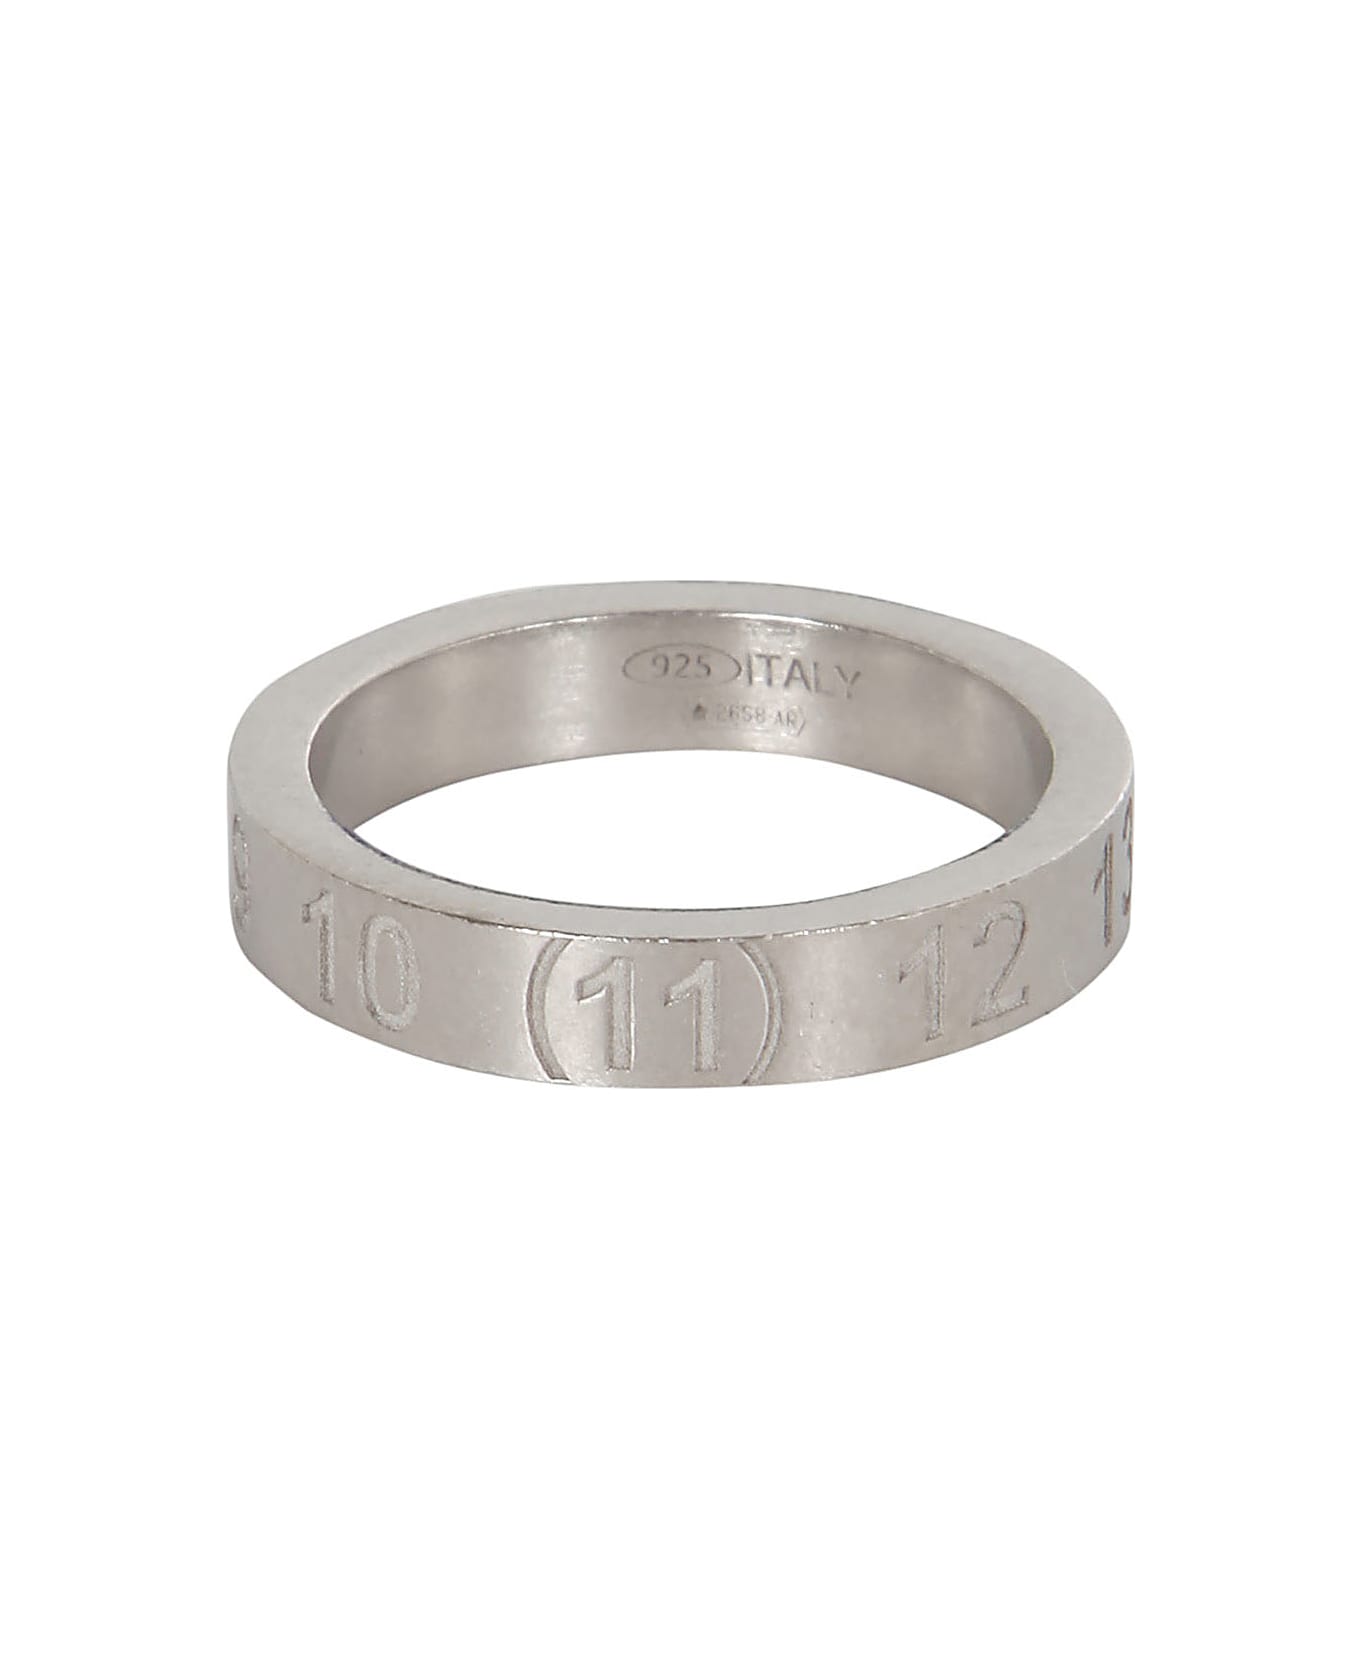 Maison Margiela Ring - to chat with us